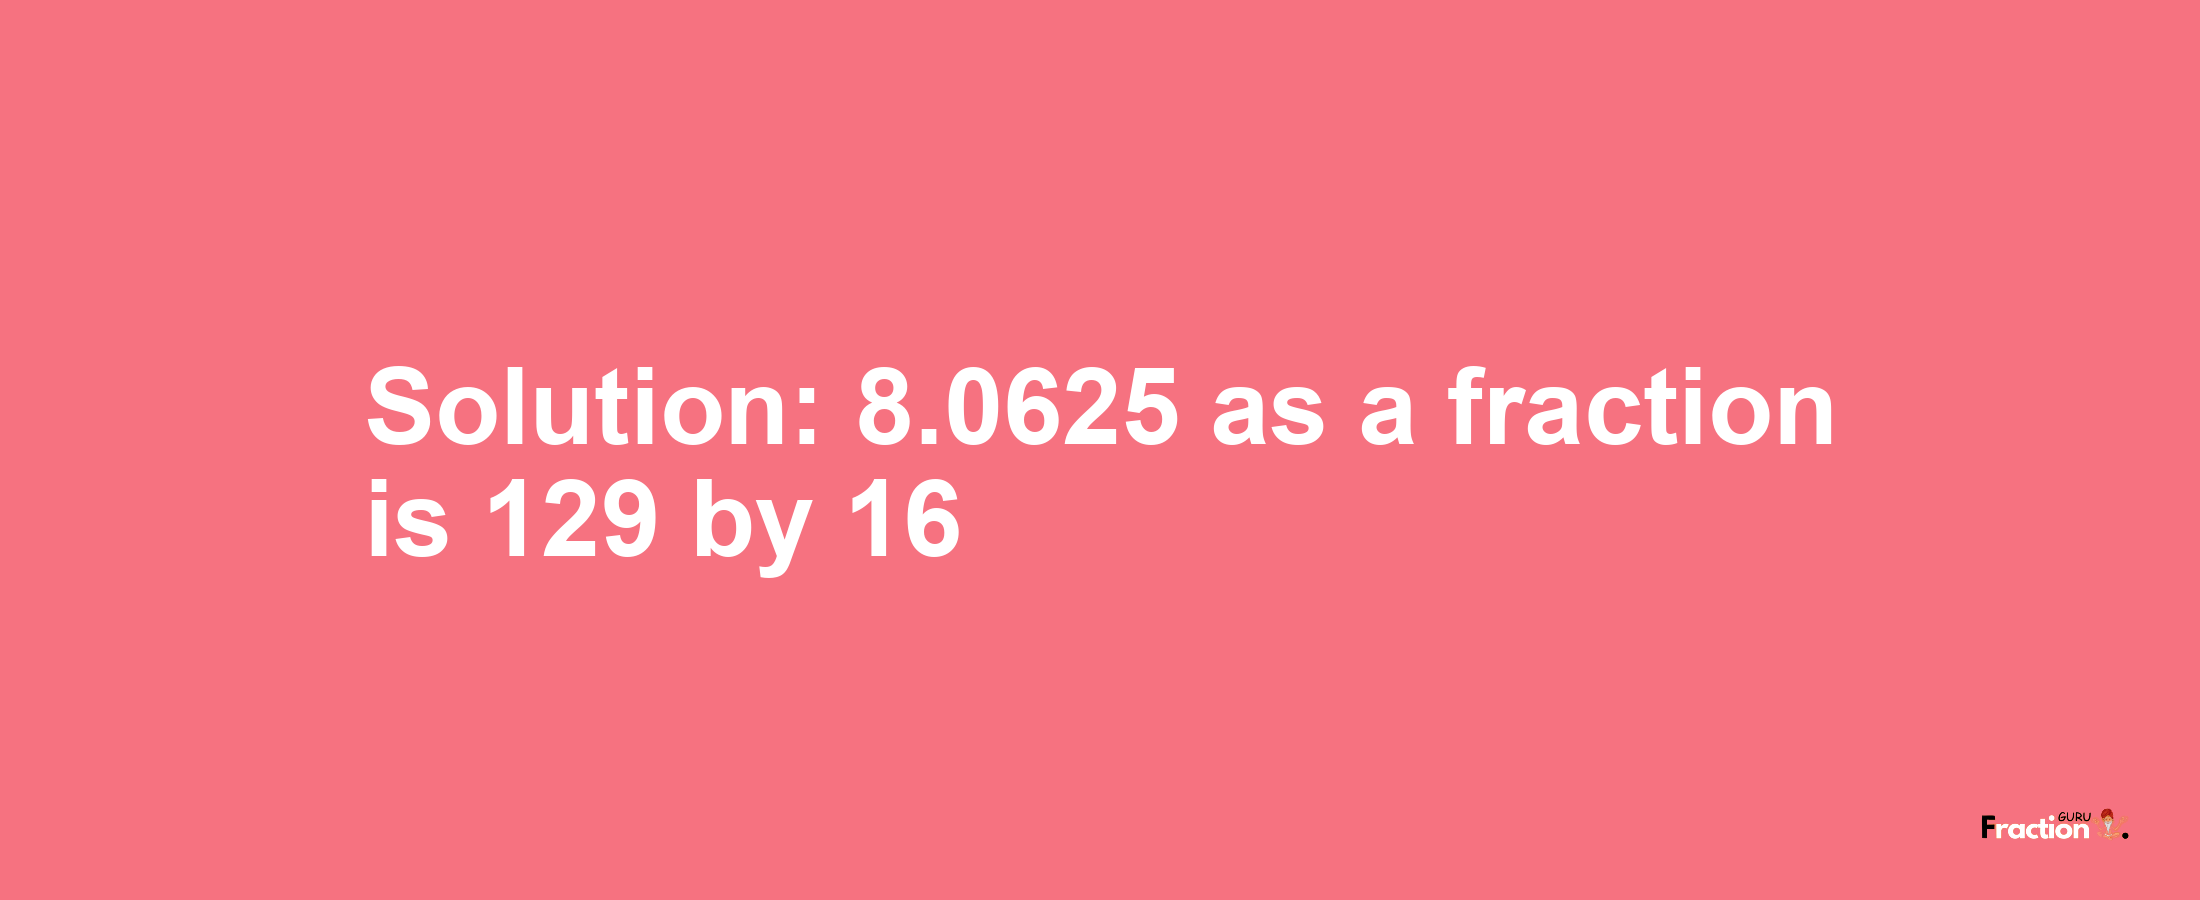 Solution:8.0625 as a fraction is 129/16